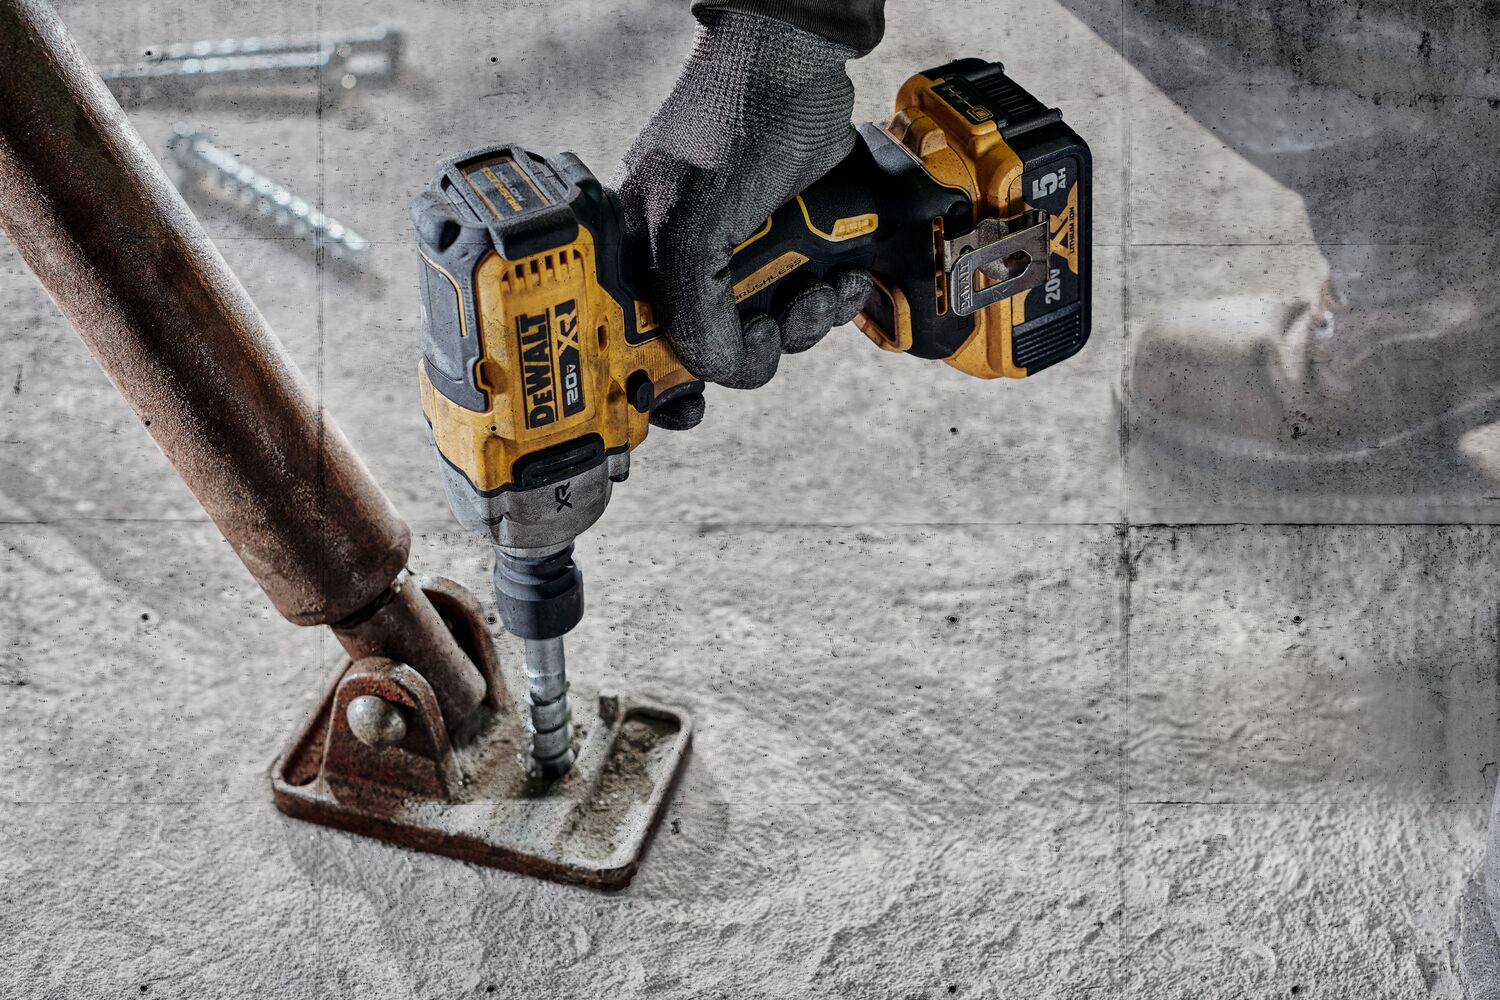 Concrete Tilt-up application using XR 1/2 inch Mid-Range Impact Wrench with Detent Pin Anvil